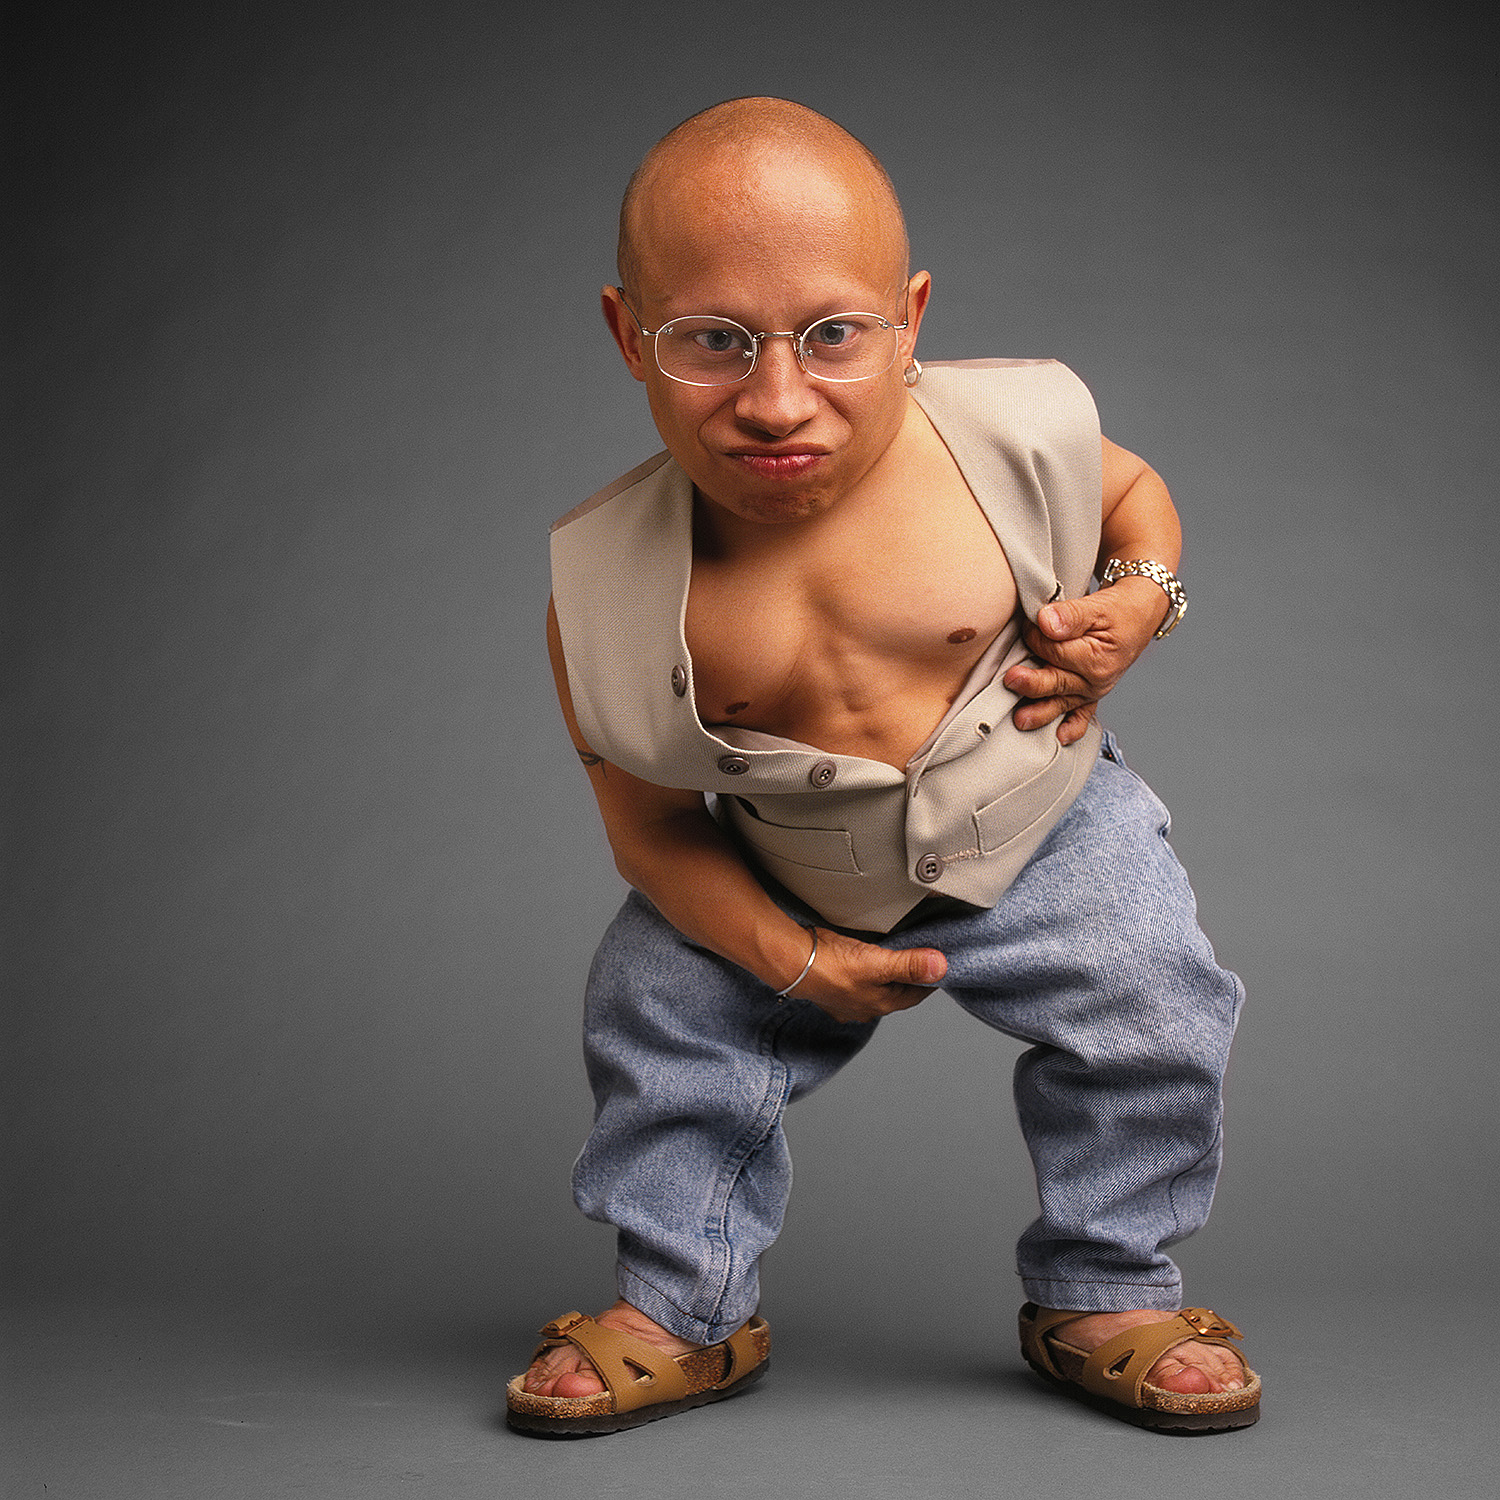 s Verne dick troyer